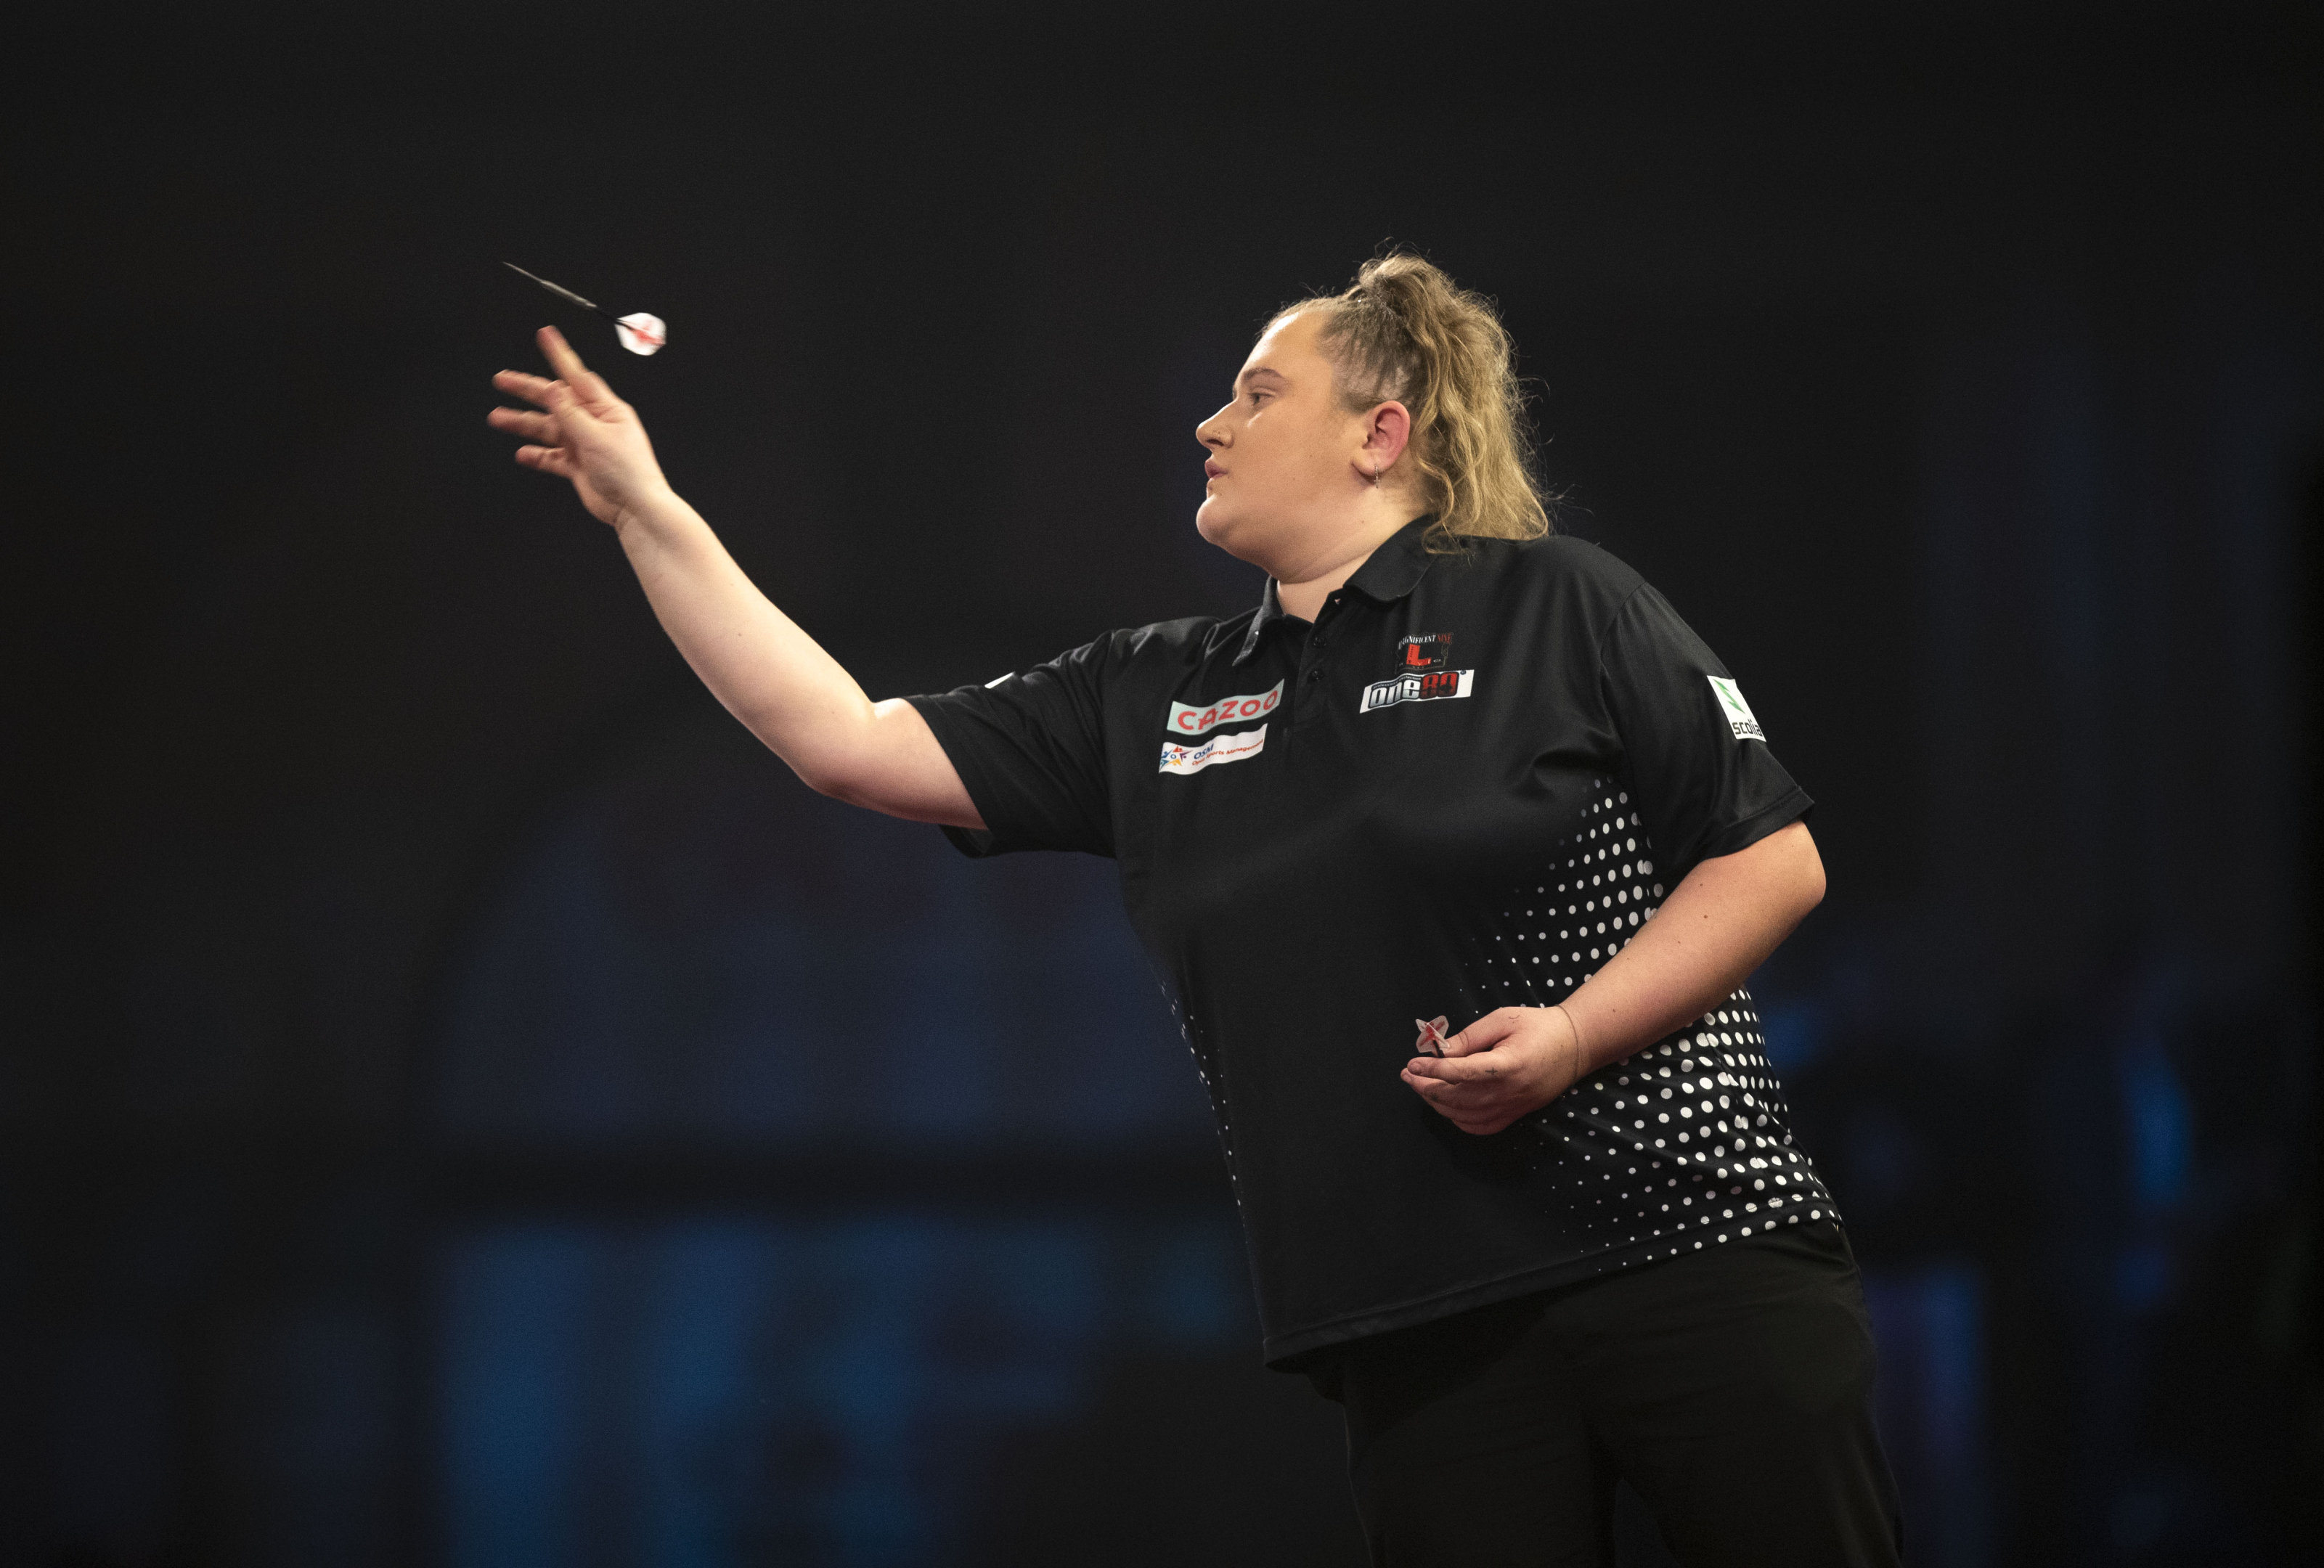 Entries for Events 9-12 on PDC Womens Series close on Thursday PDC